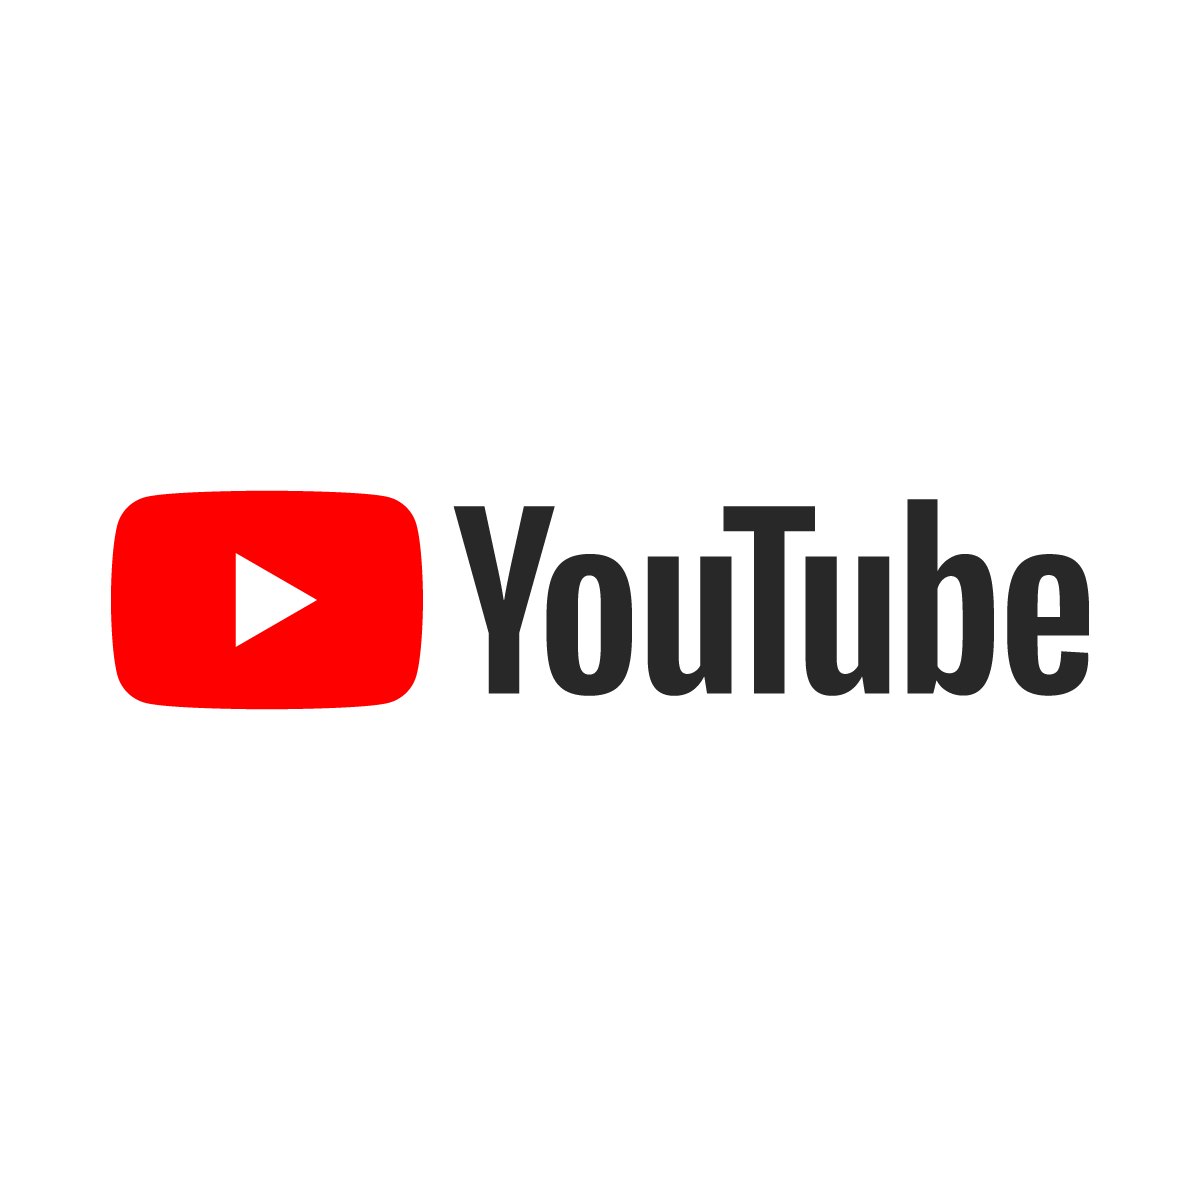 What is YouTube and How To copy a YouTube video link